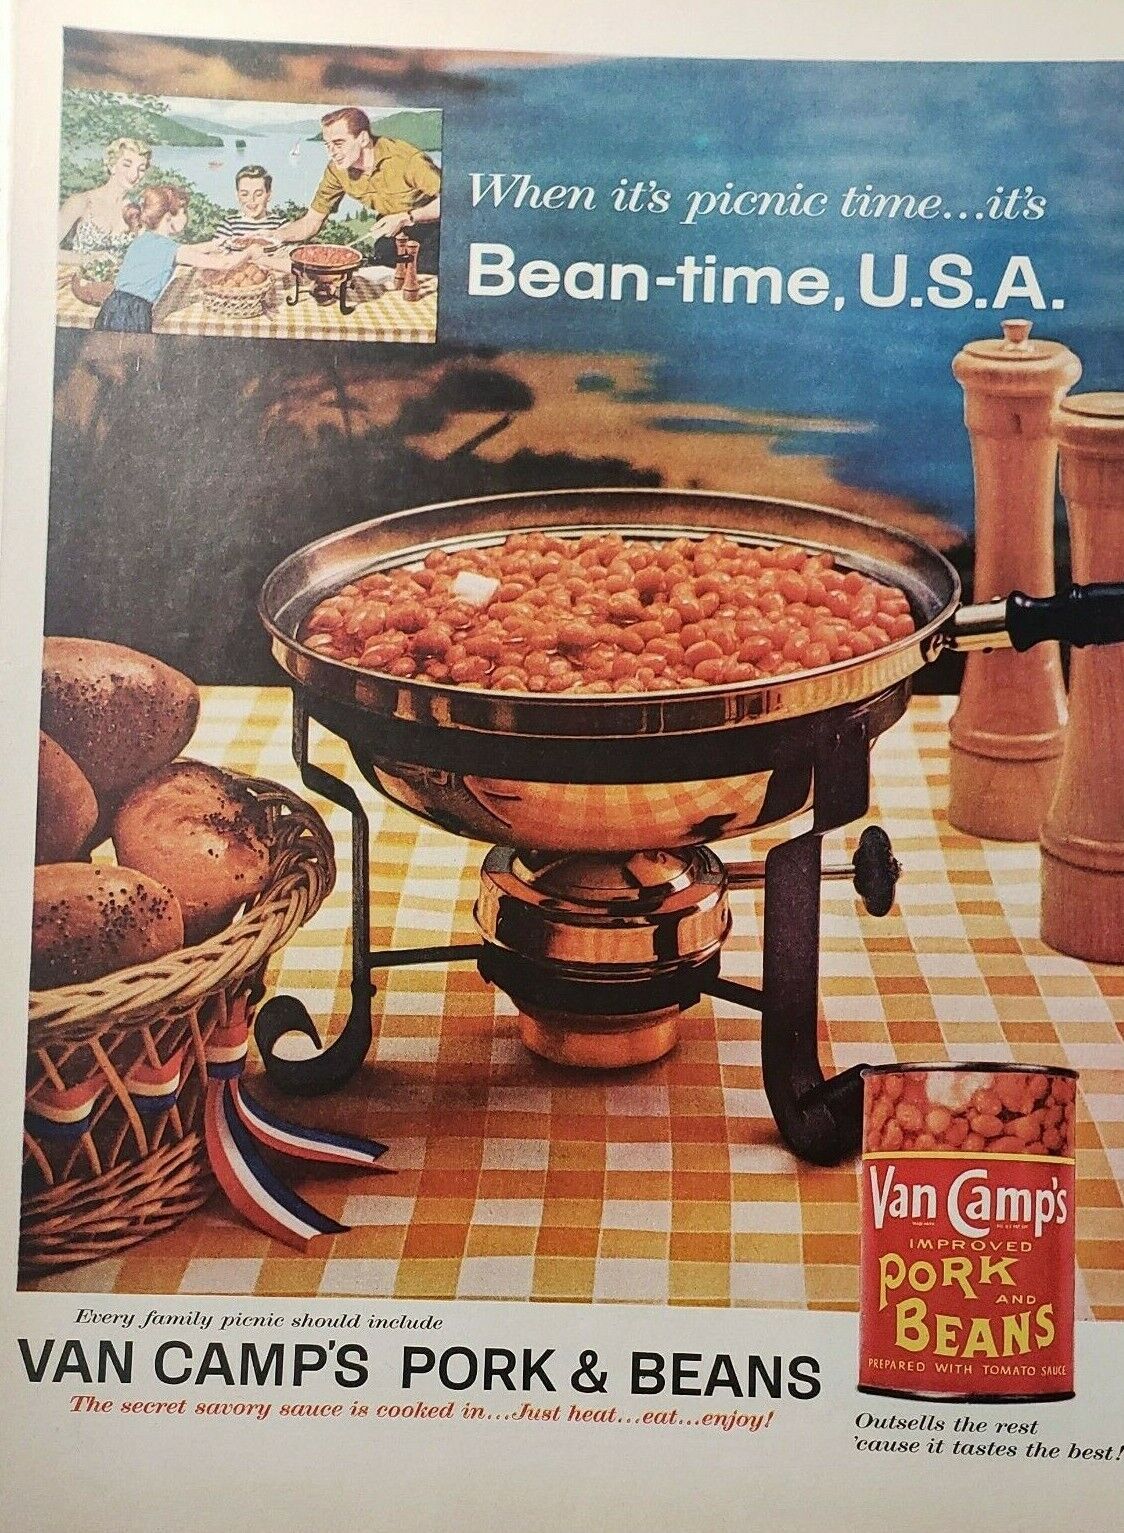 Lot of 3 Vintage 1958 Stokely Van Camps Baked Beans Print Ads 